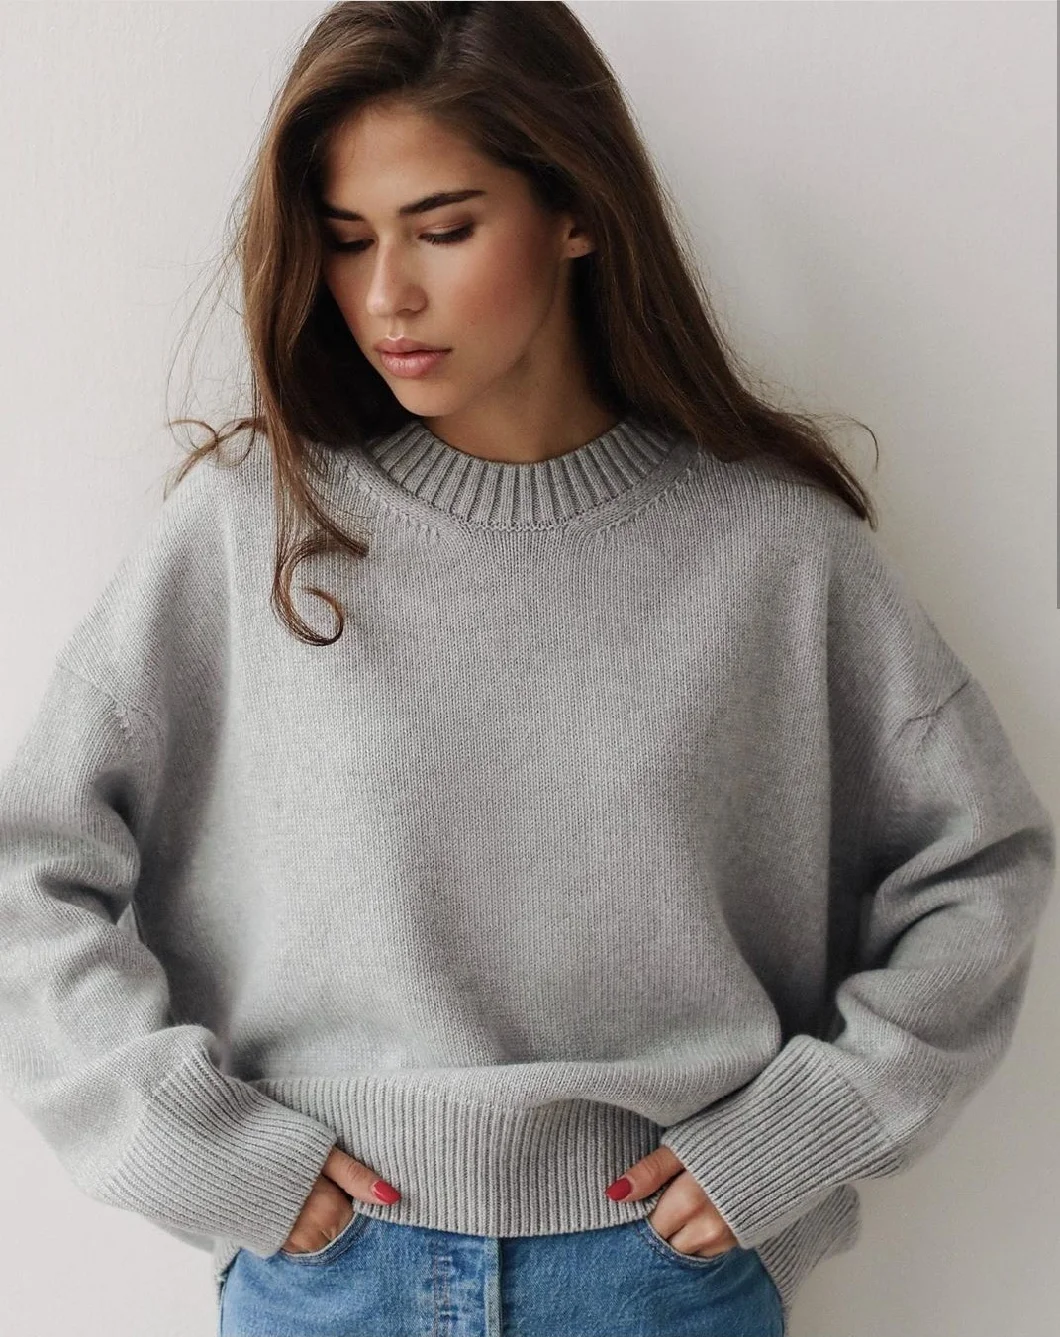 Womens Casual Solid Color Pullover Sweater Women Fall Rib Knit Long Sleeve Crew Neck Classic Sweater